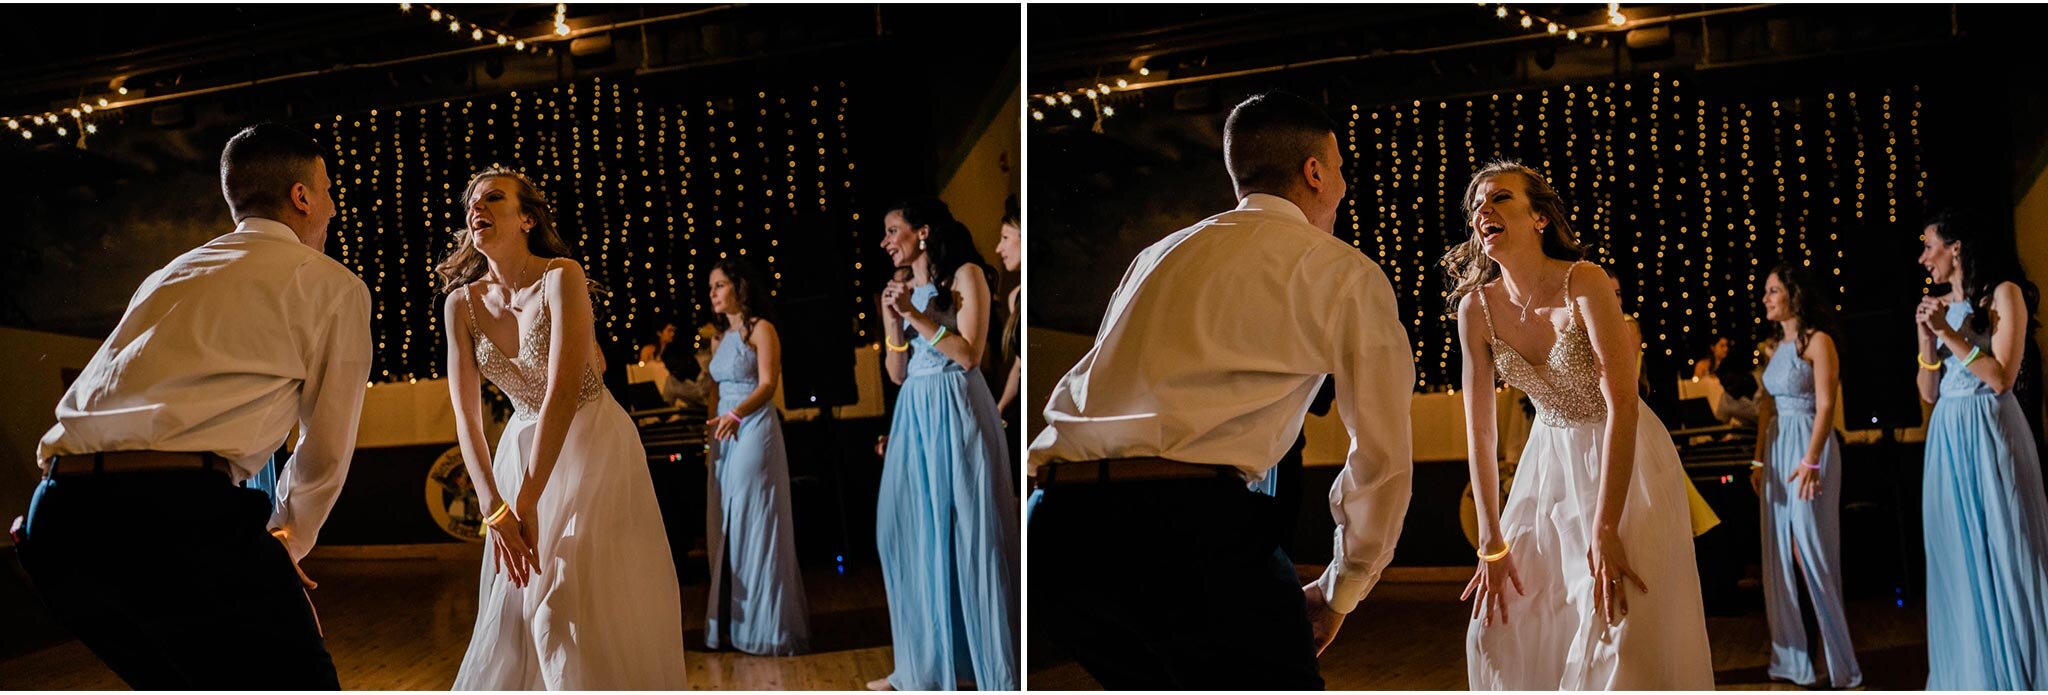 Durham Wedding Photographer | By G. Lin Photography | Dancing during reception